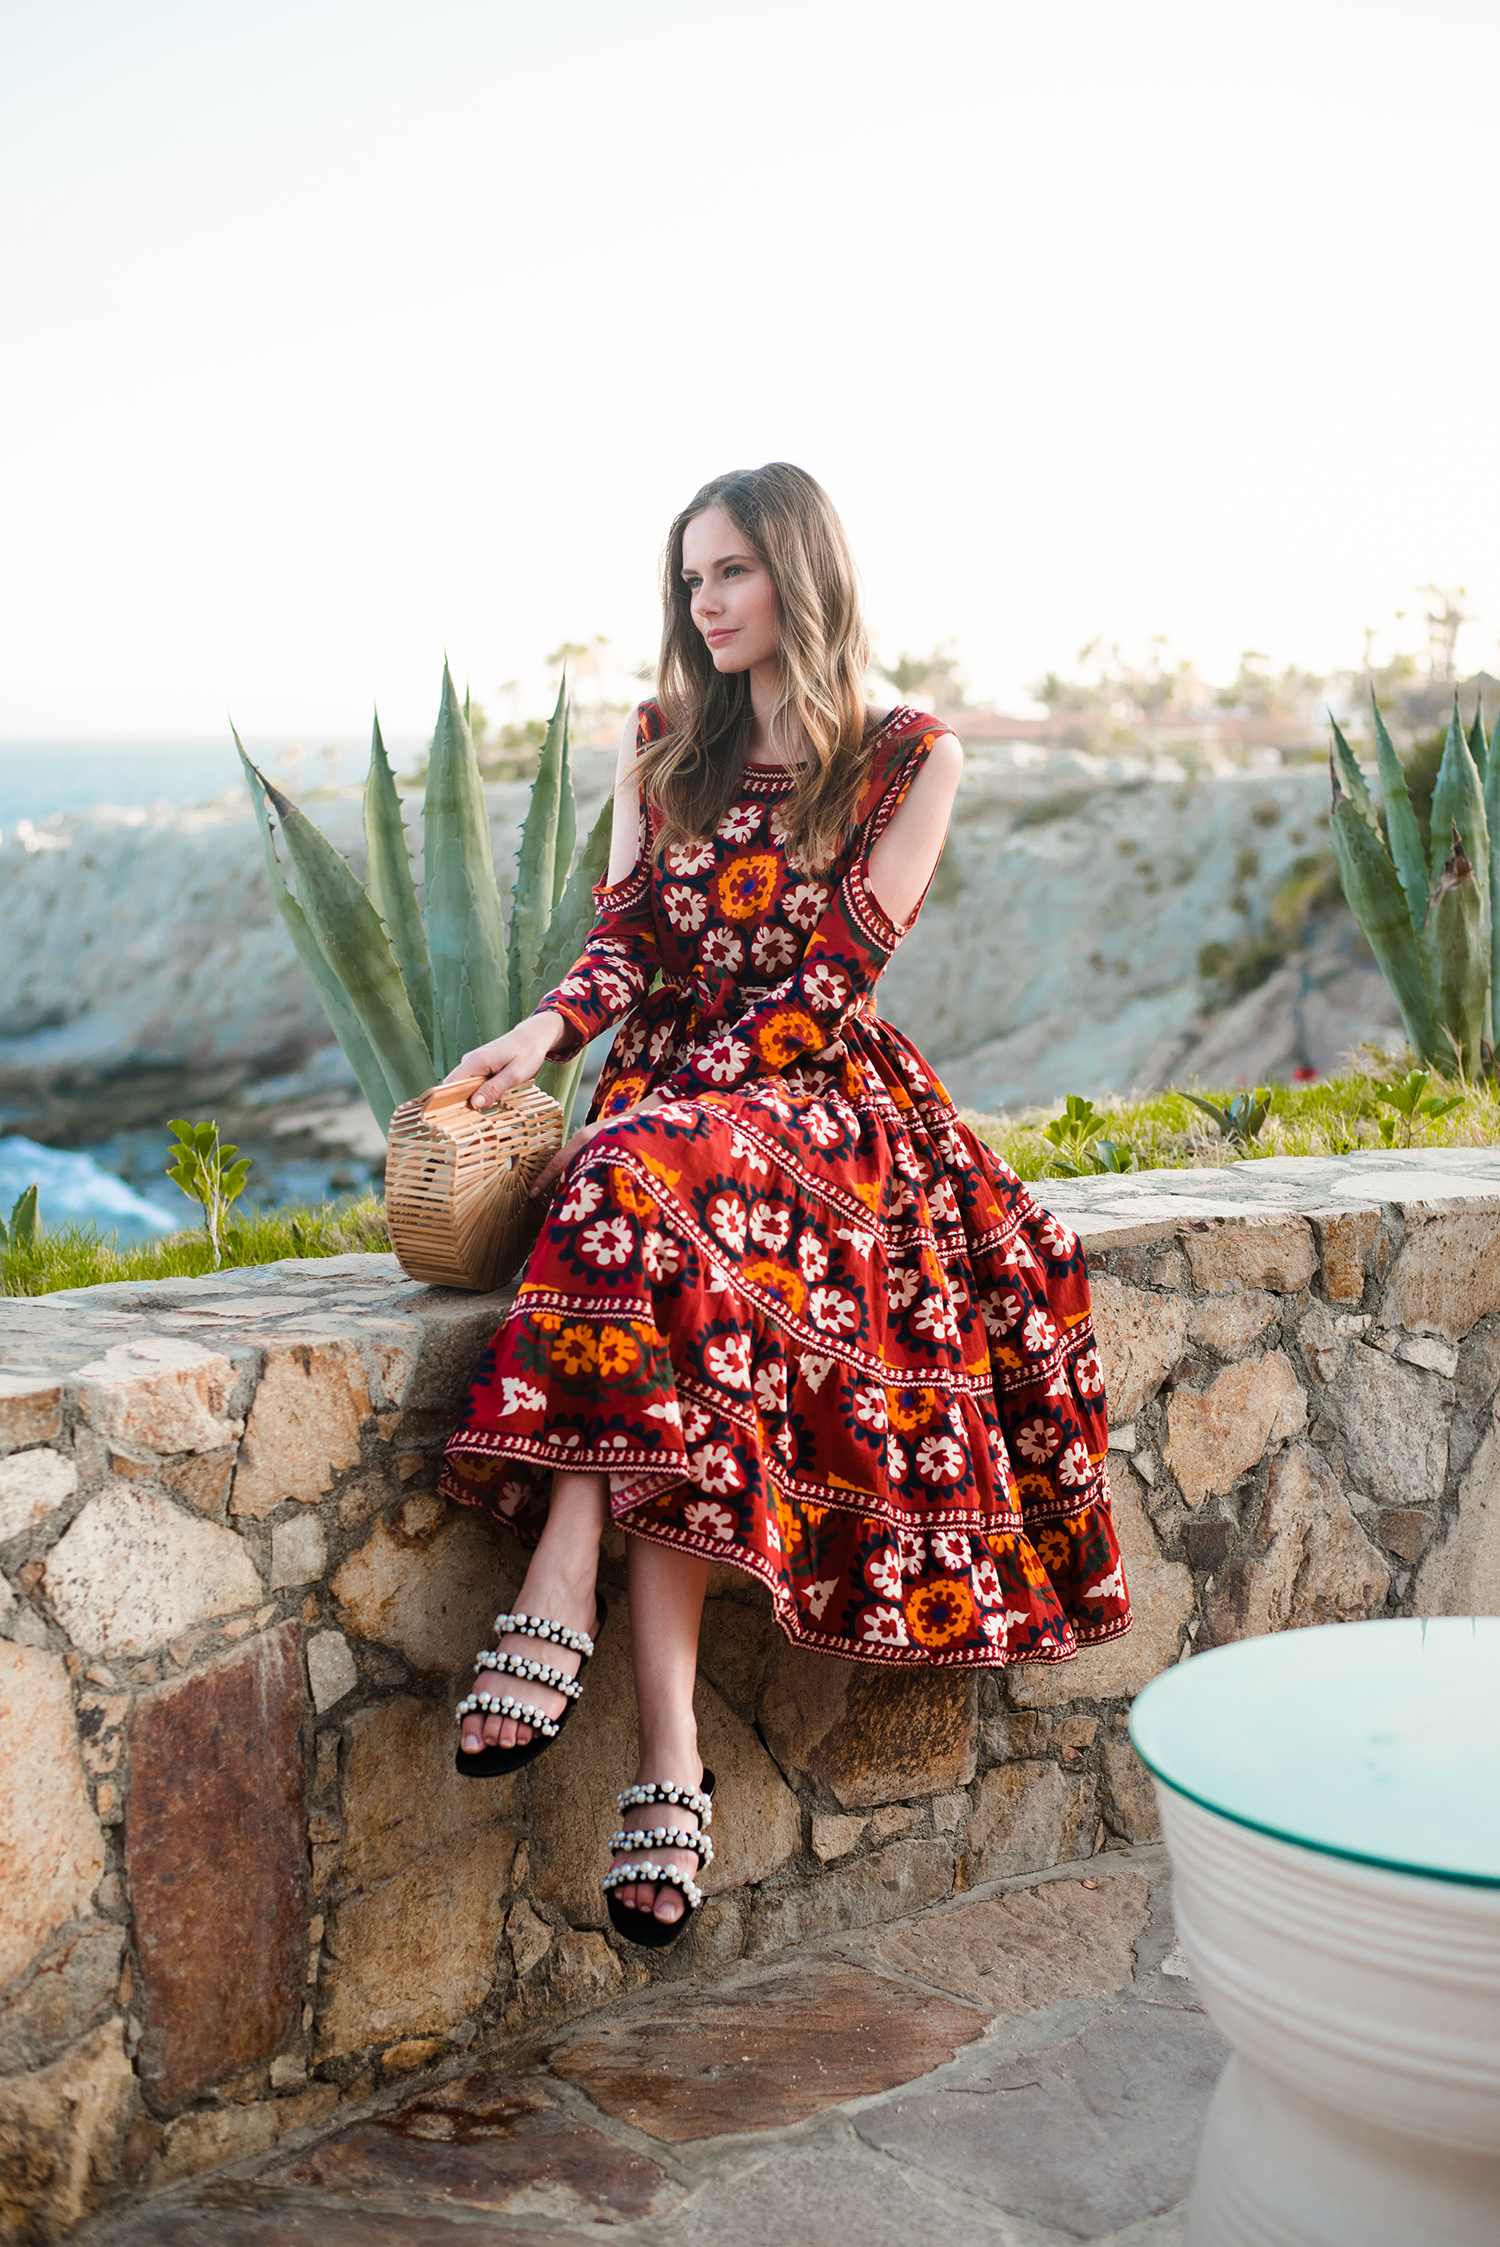 Alyssa Campanella of The A List blog shares how she plans her outfits for her travels.